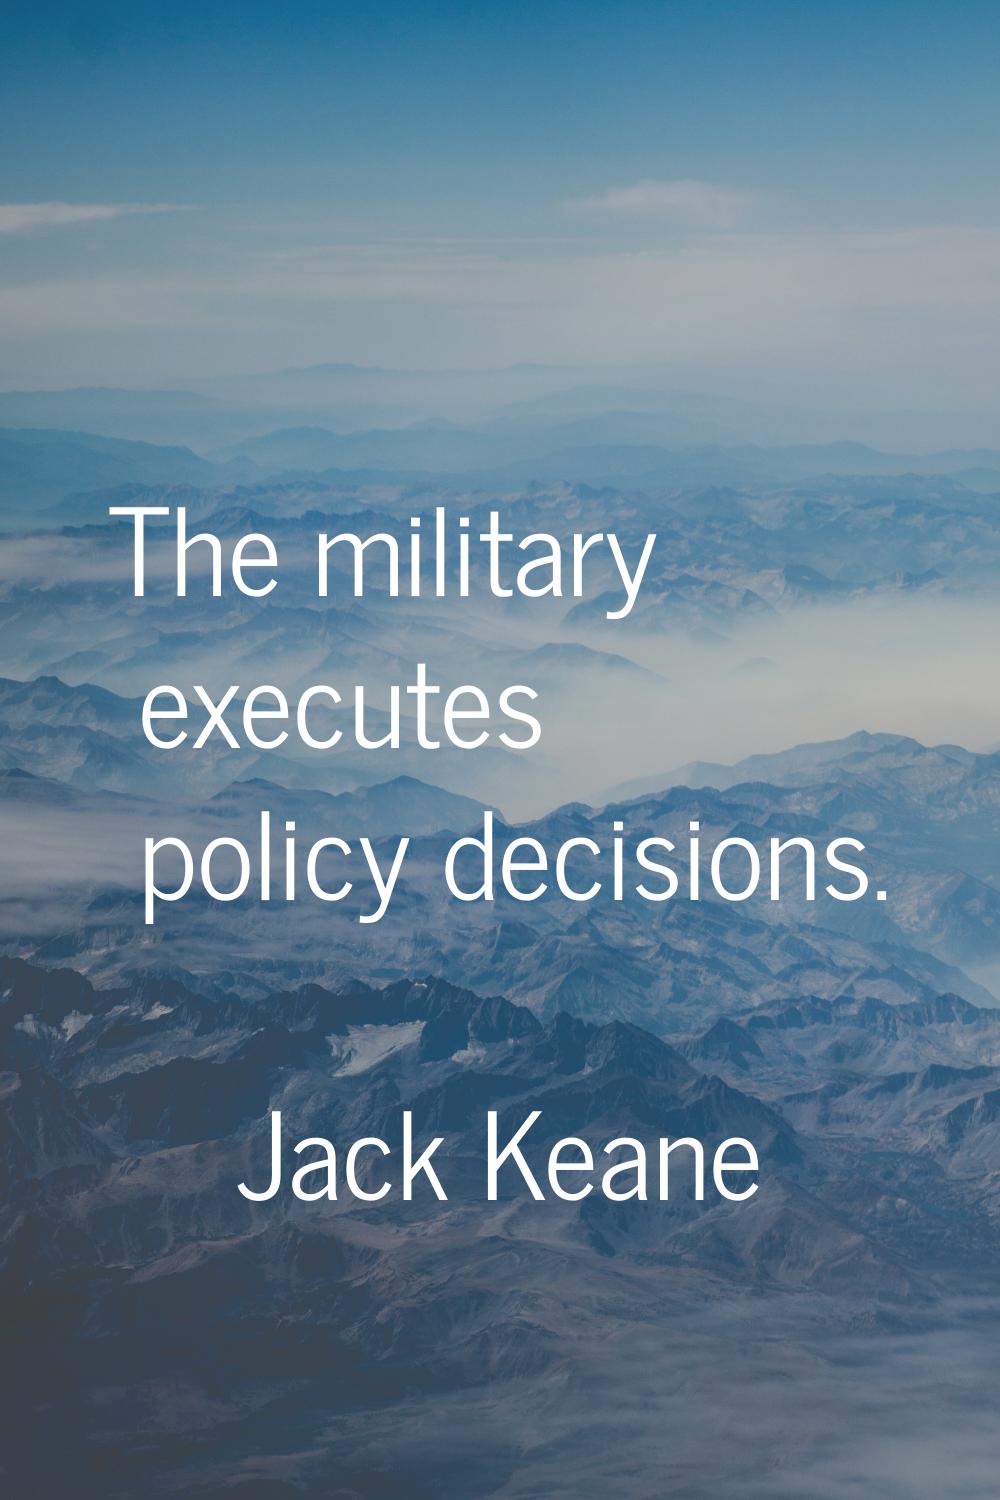 The military executes policy decisions.